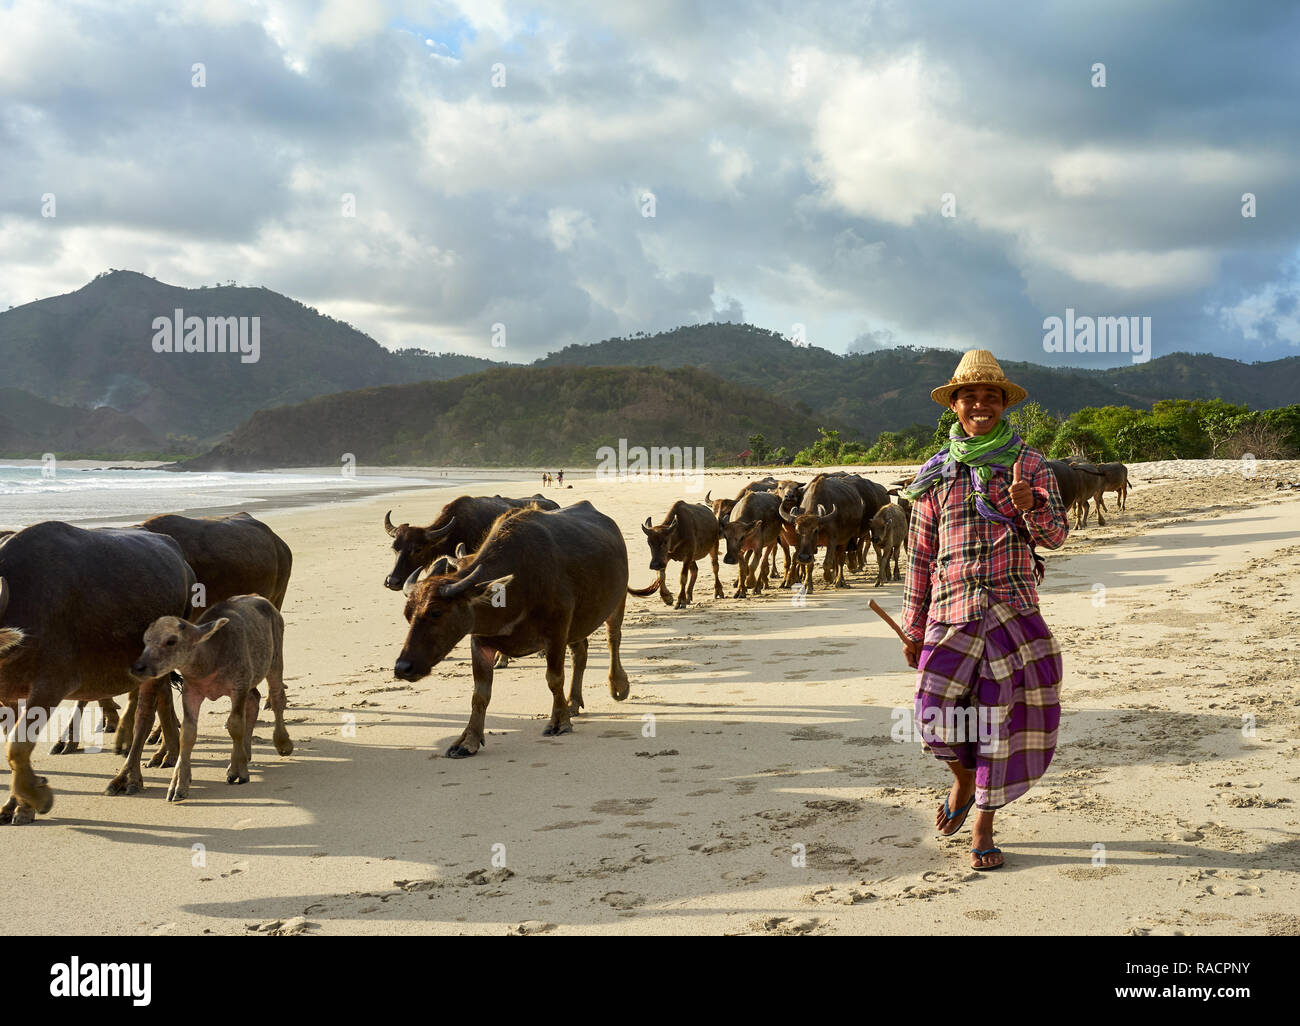 Herdsman and buffalos crossing the beach at Selong Belanak, as they return from grazing in the fields, Lombok, Indonesia, Southeast Asia, Asia Stock Photo